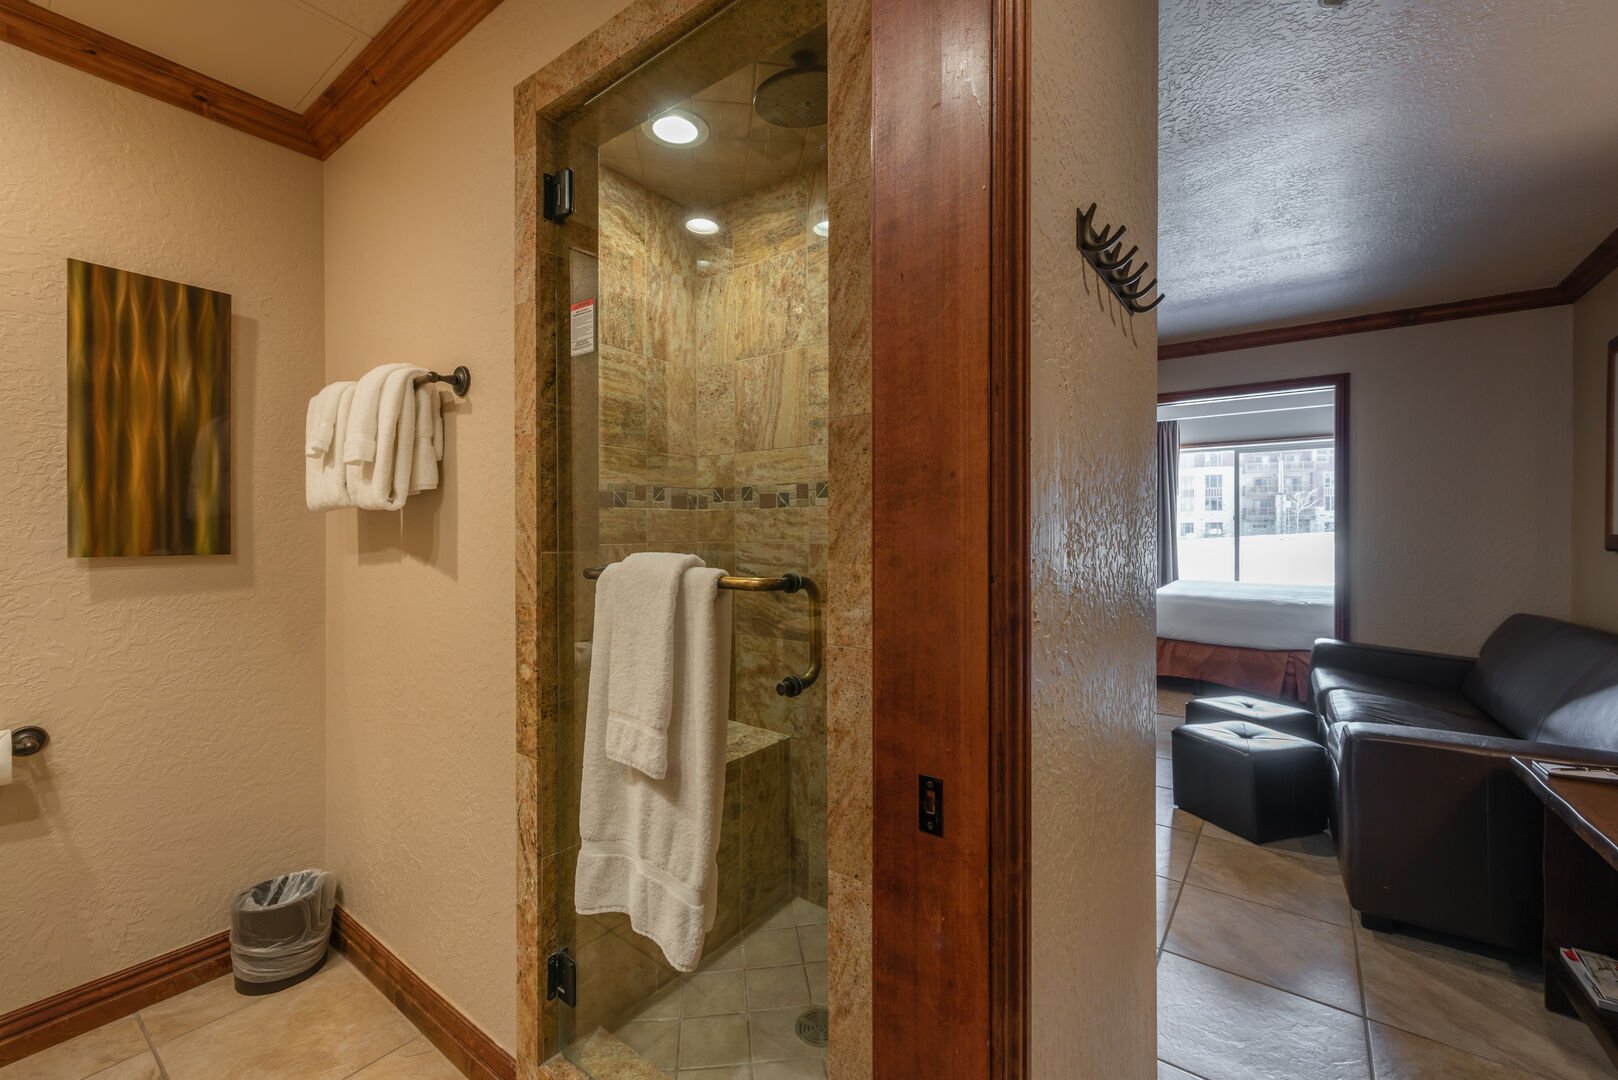 Shower with stone and seat